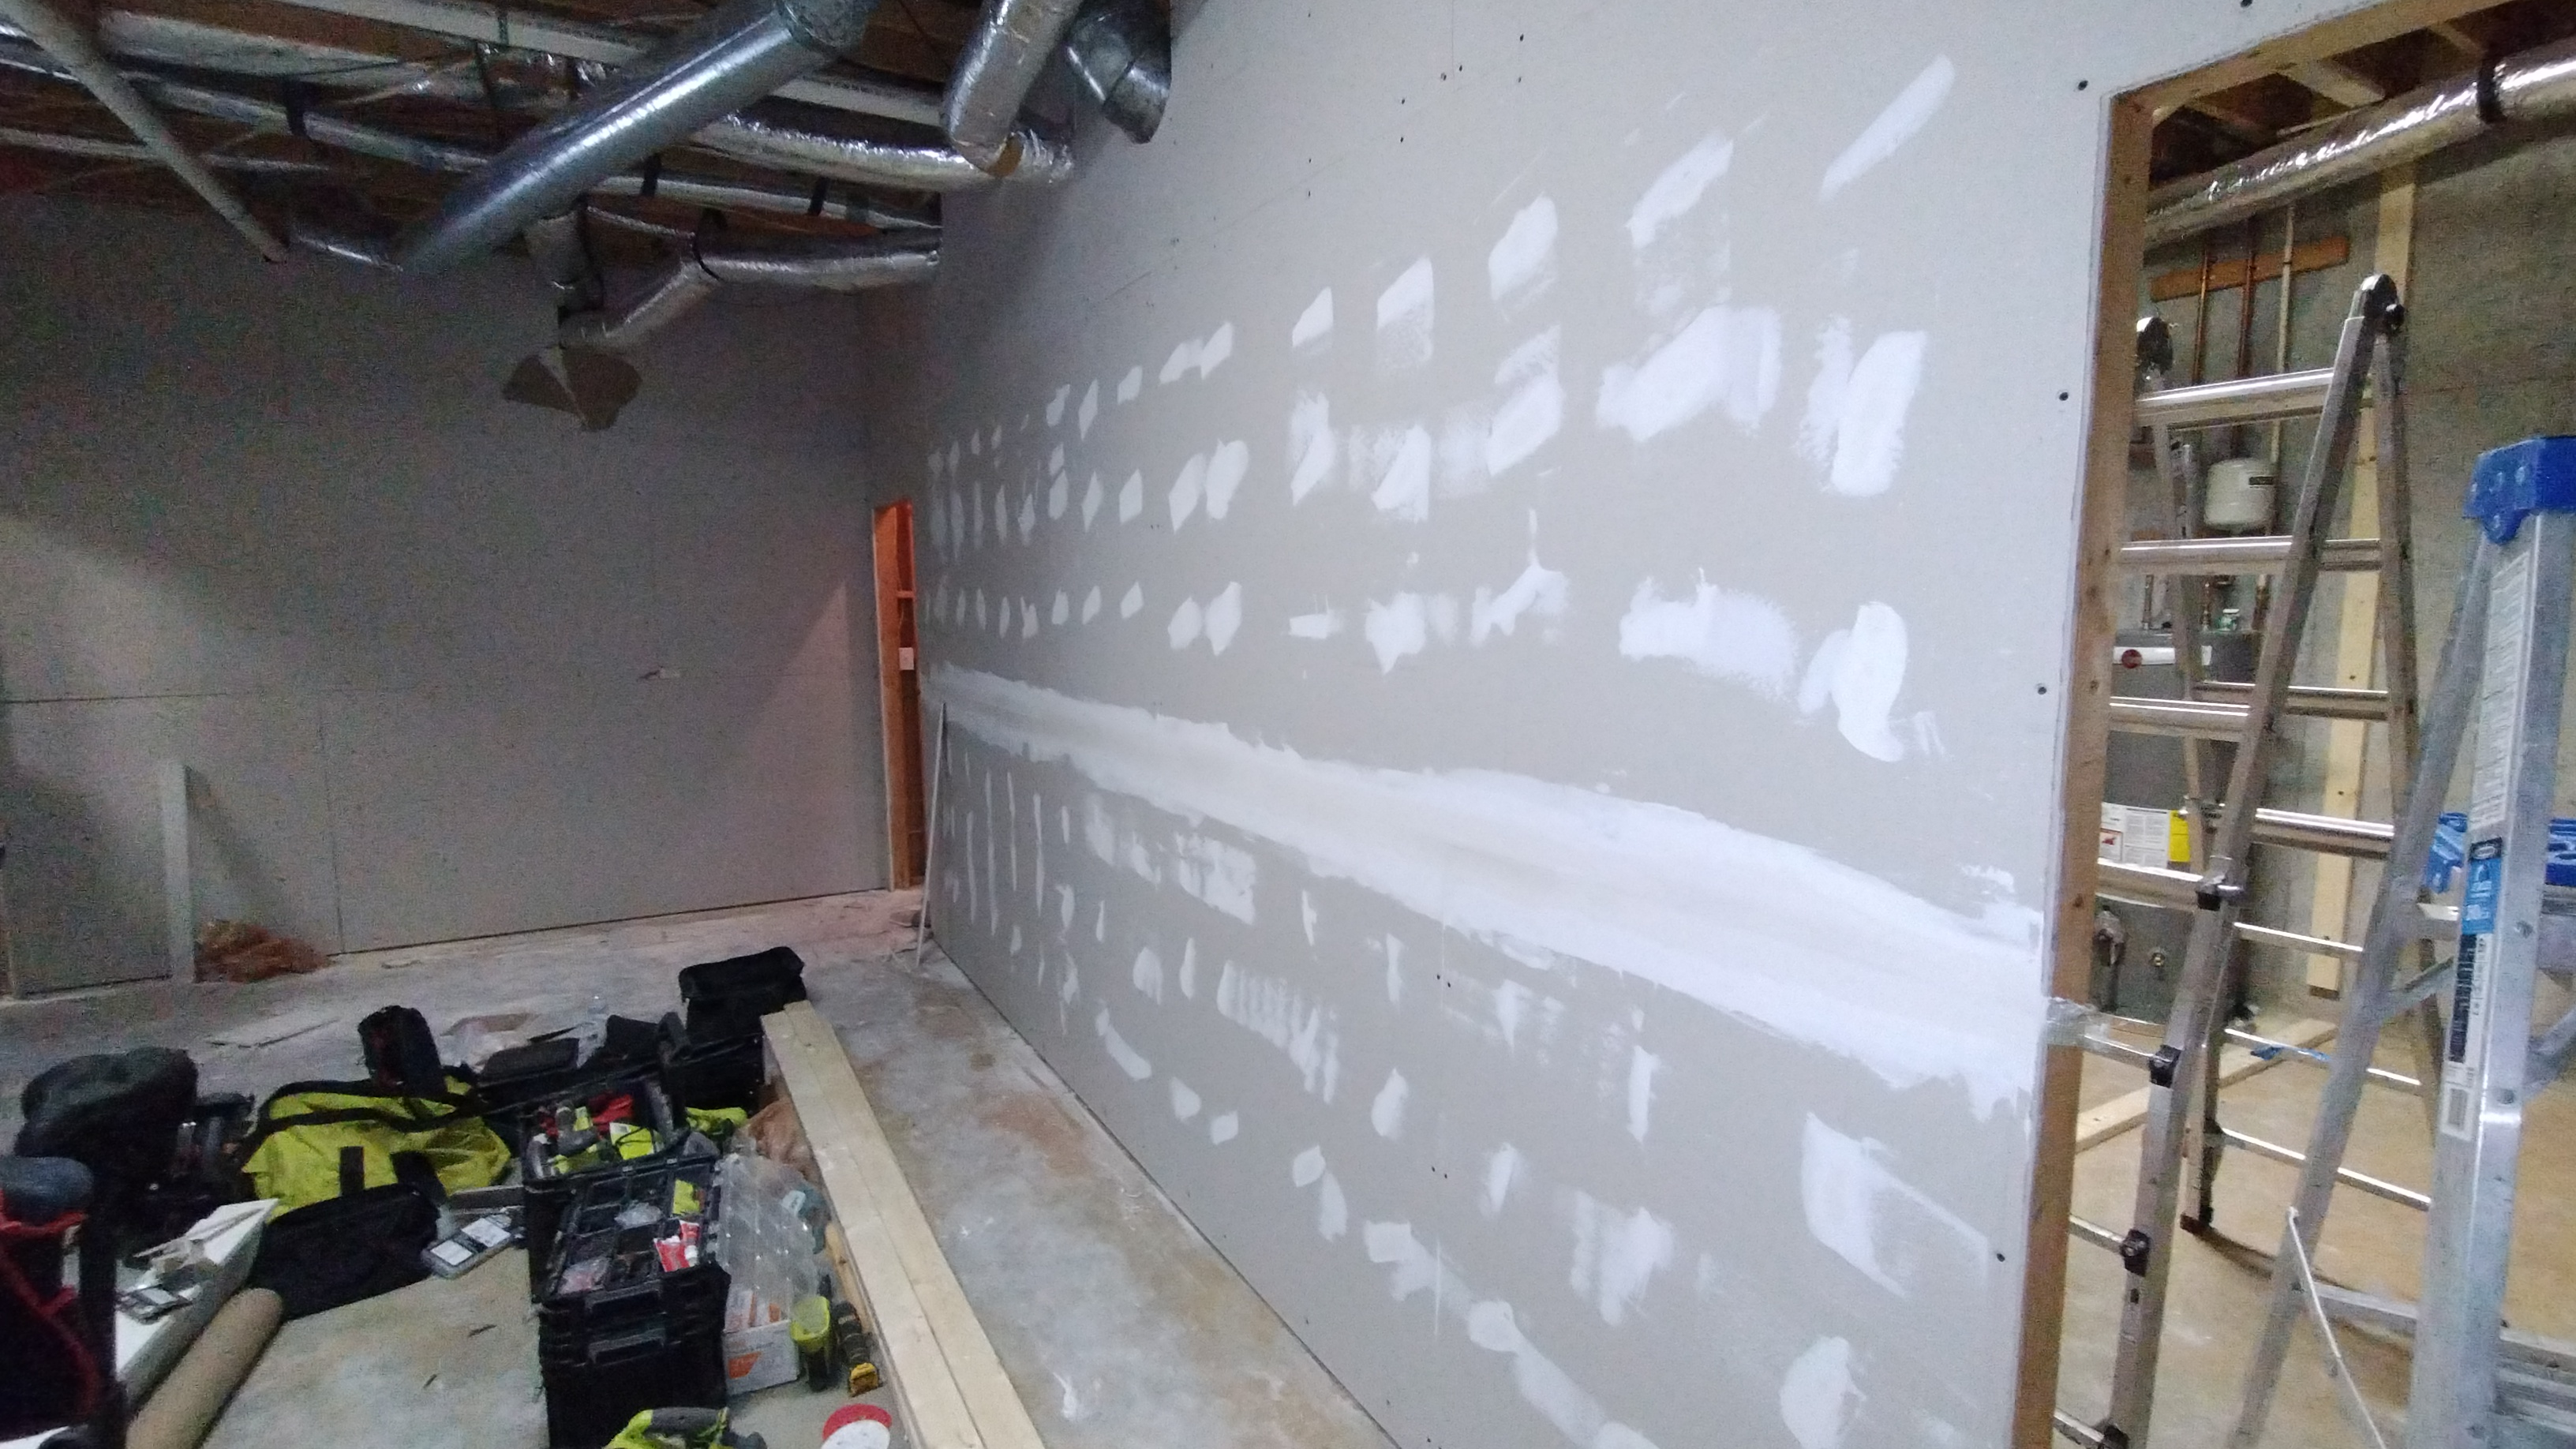 During Remodel: Witness the Work in Progress as the Basement Takes Shape, Transitioning into Your Future Home Gym